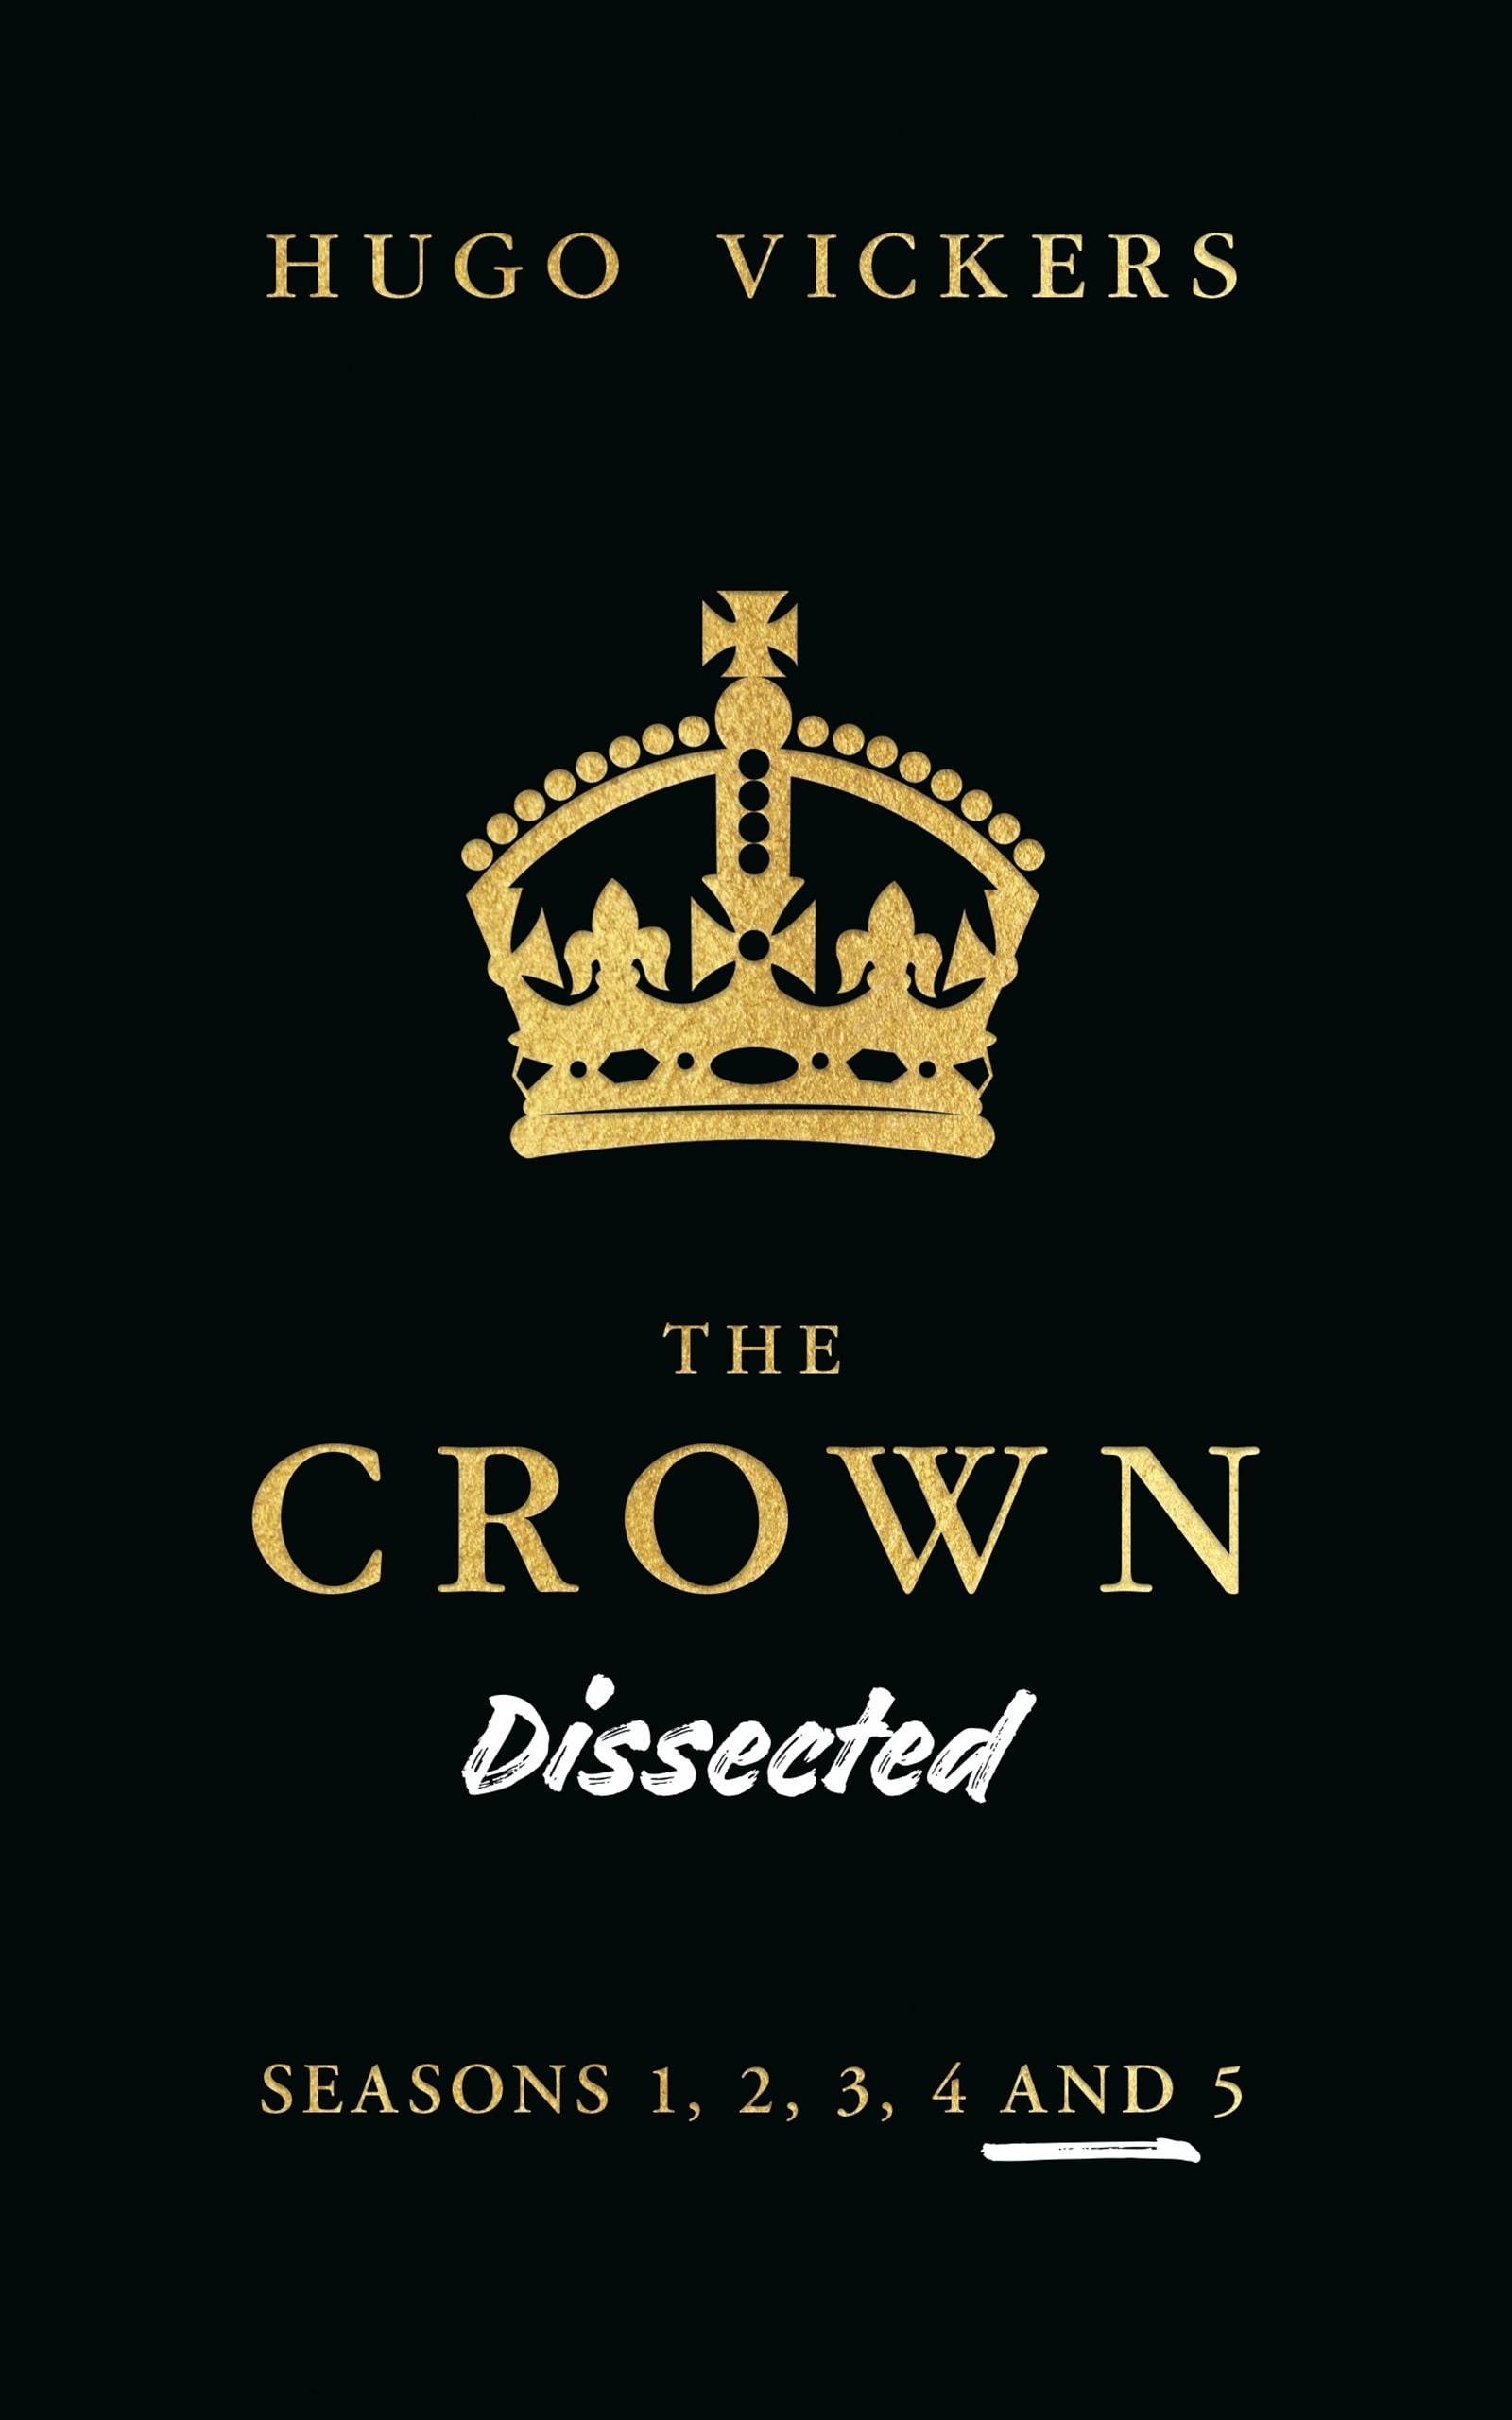 The Crown Dissected